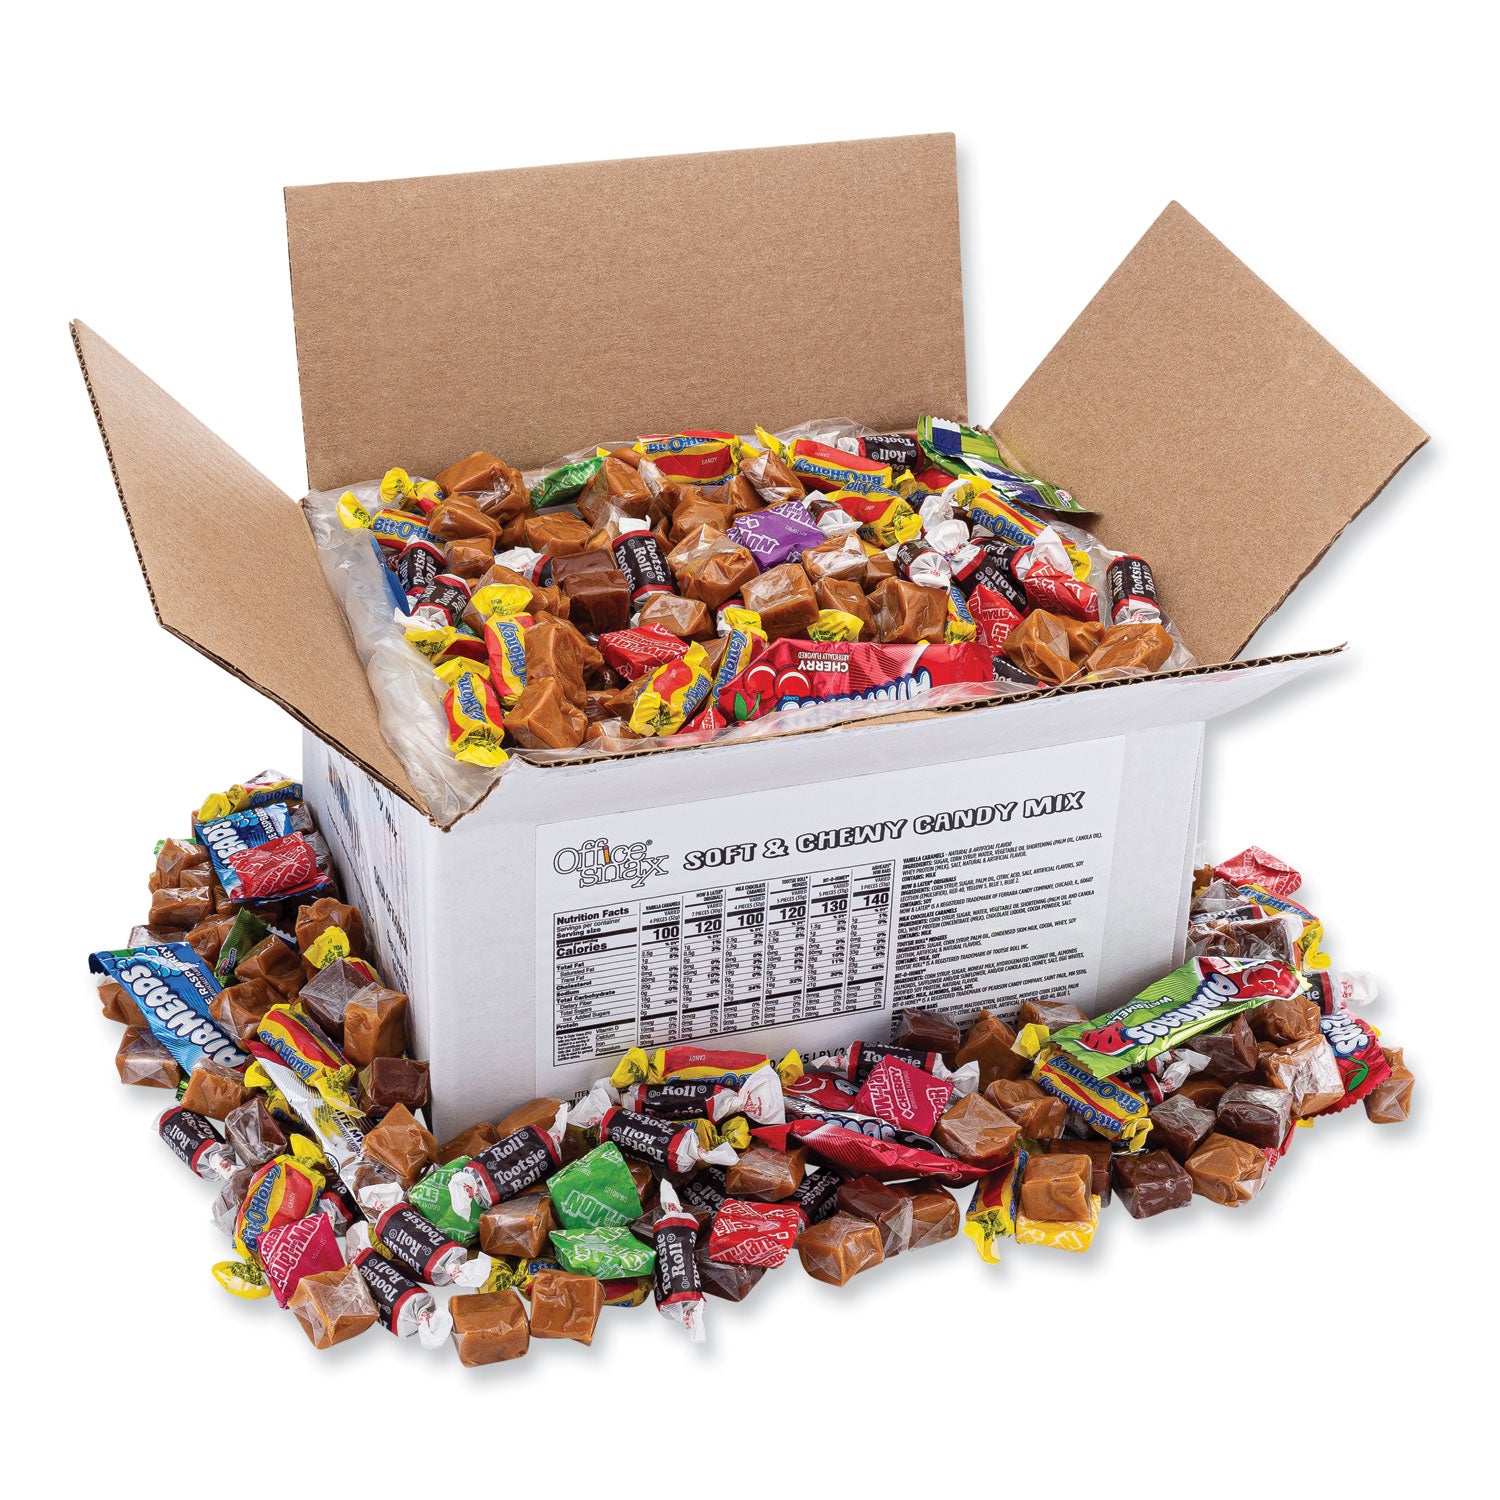 candy-assortments-soft-and-chewy-candy-mix-5-lb-carton_ofx00656 - 1